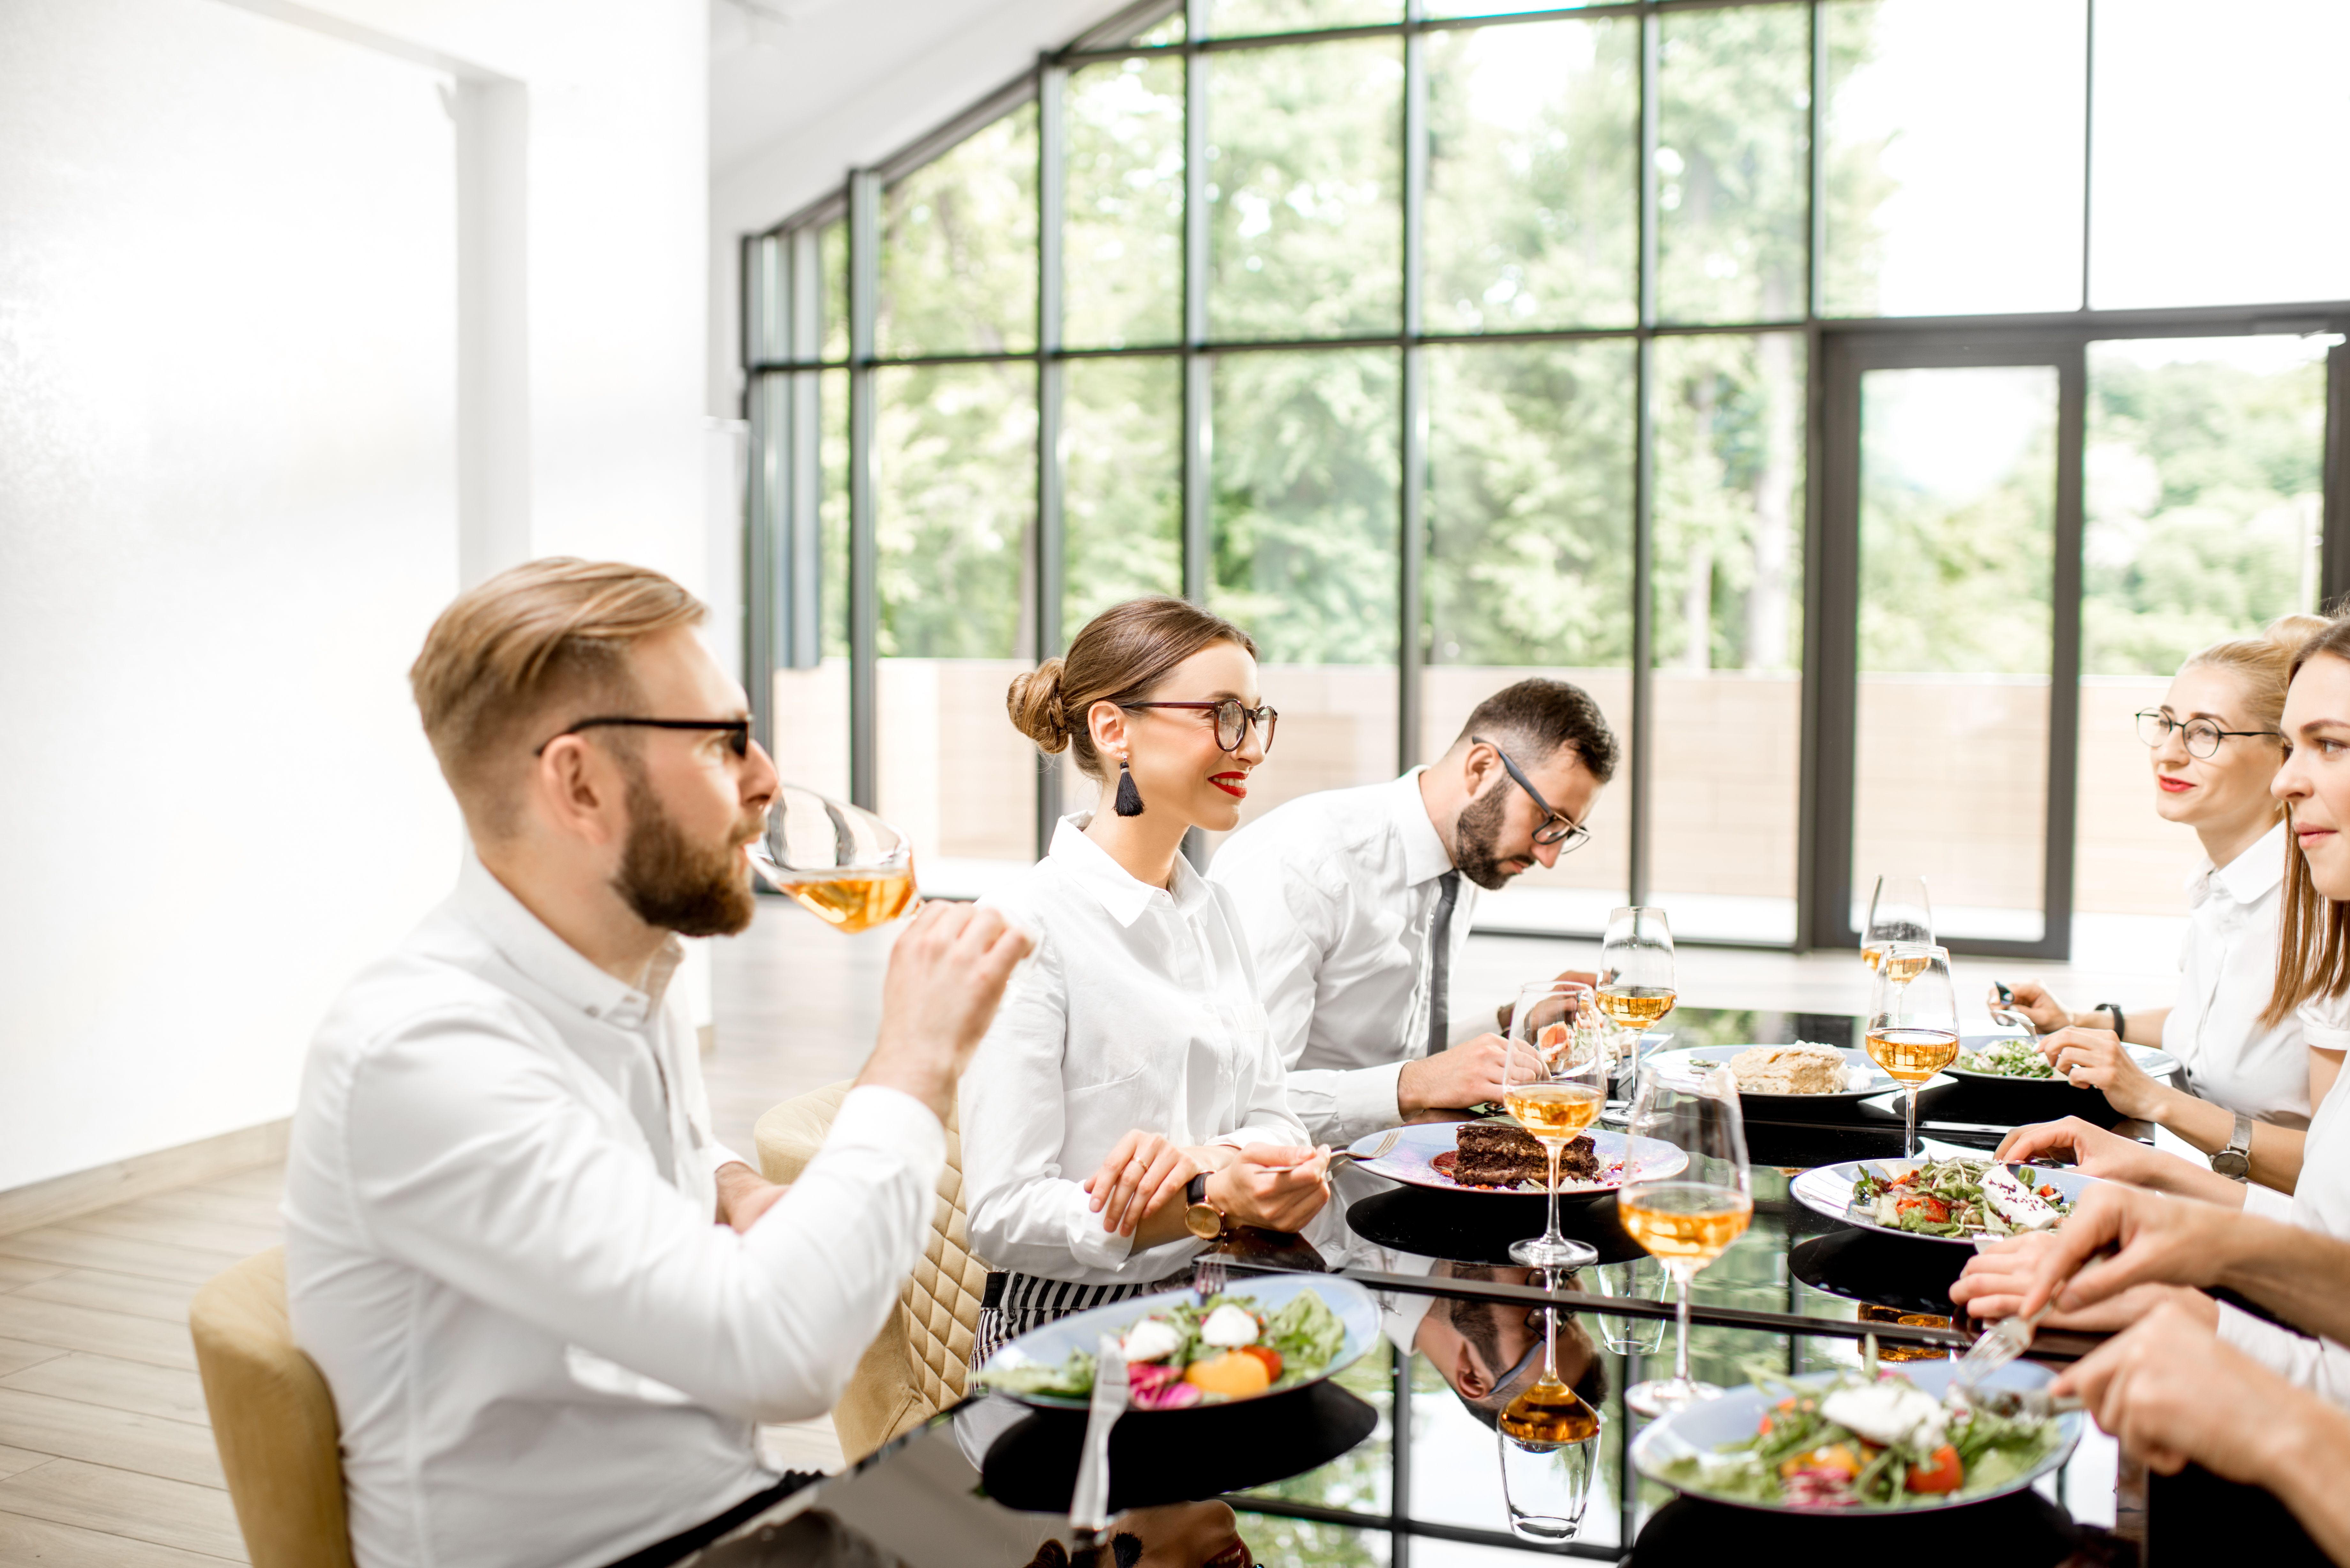 iSTOCK PURCHASED_min - Corporate people sit down lunch